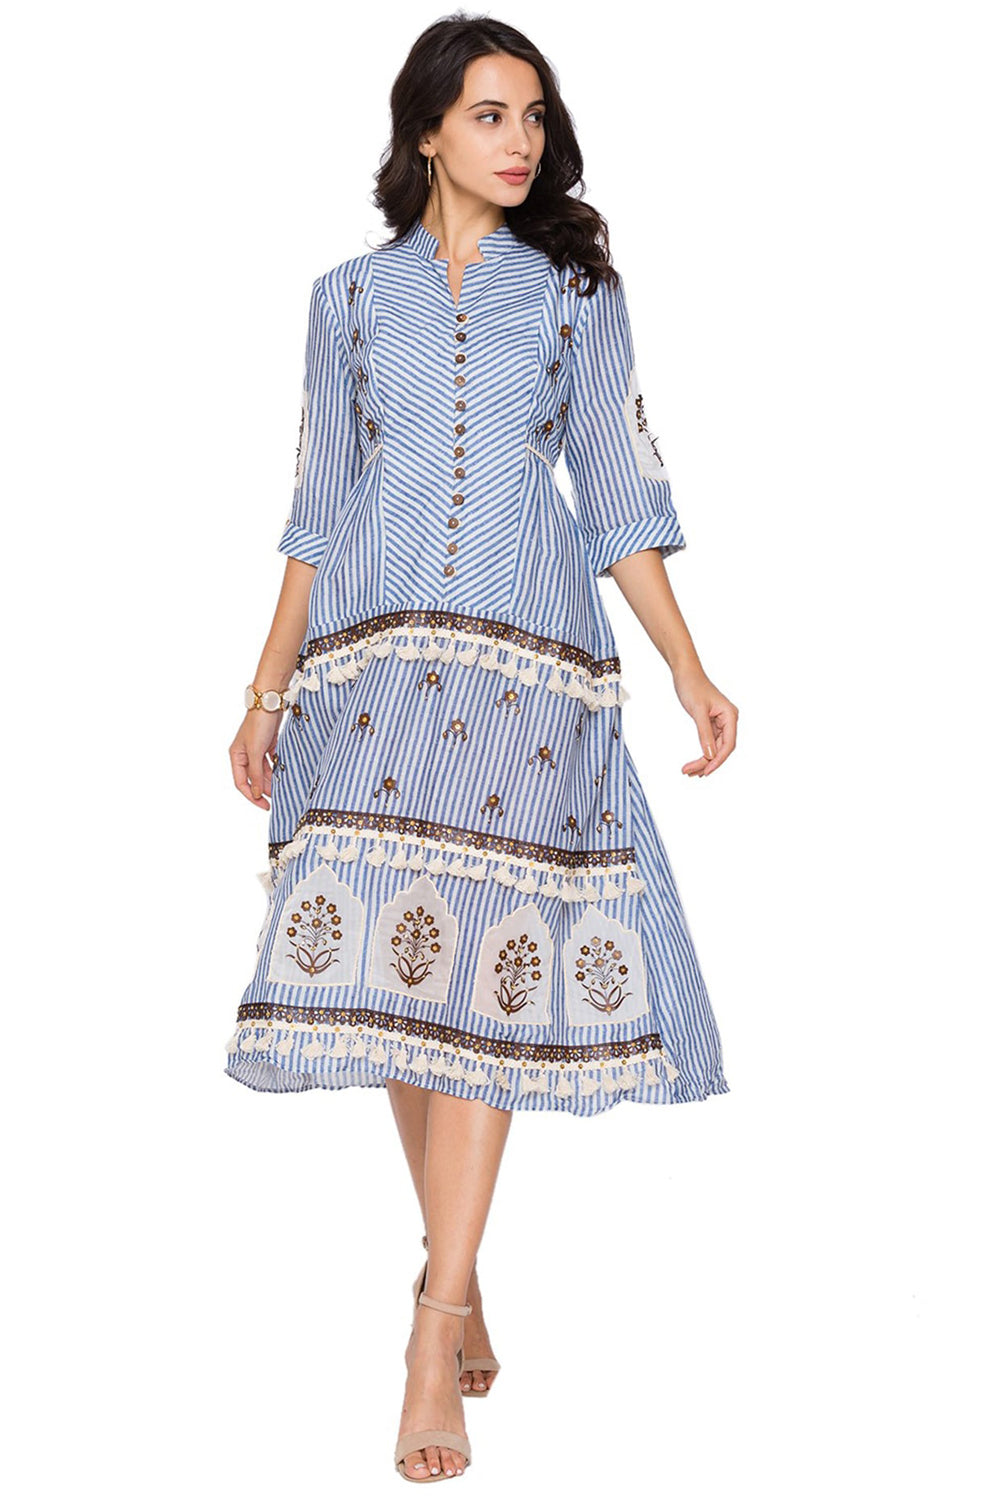 Sartorial Printed  Short Tier Dress With Cutwork Leather Embroidery With Lace And Potli Buttons